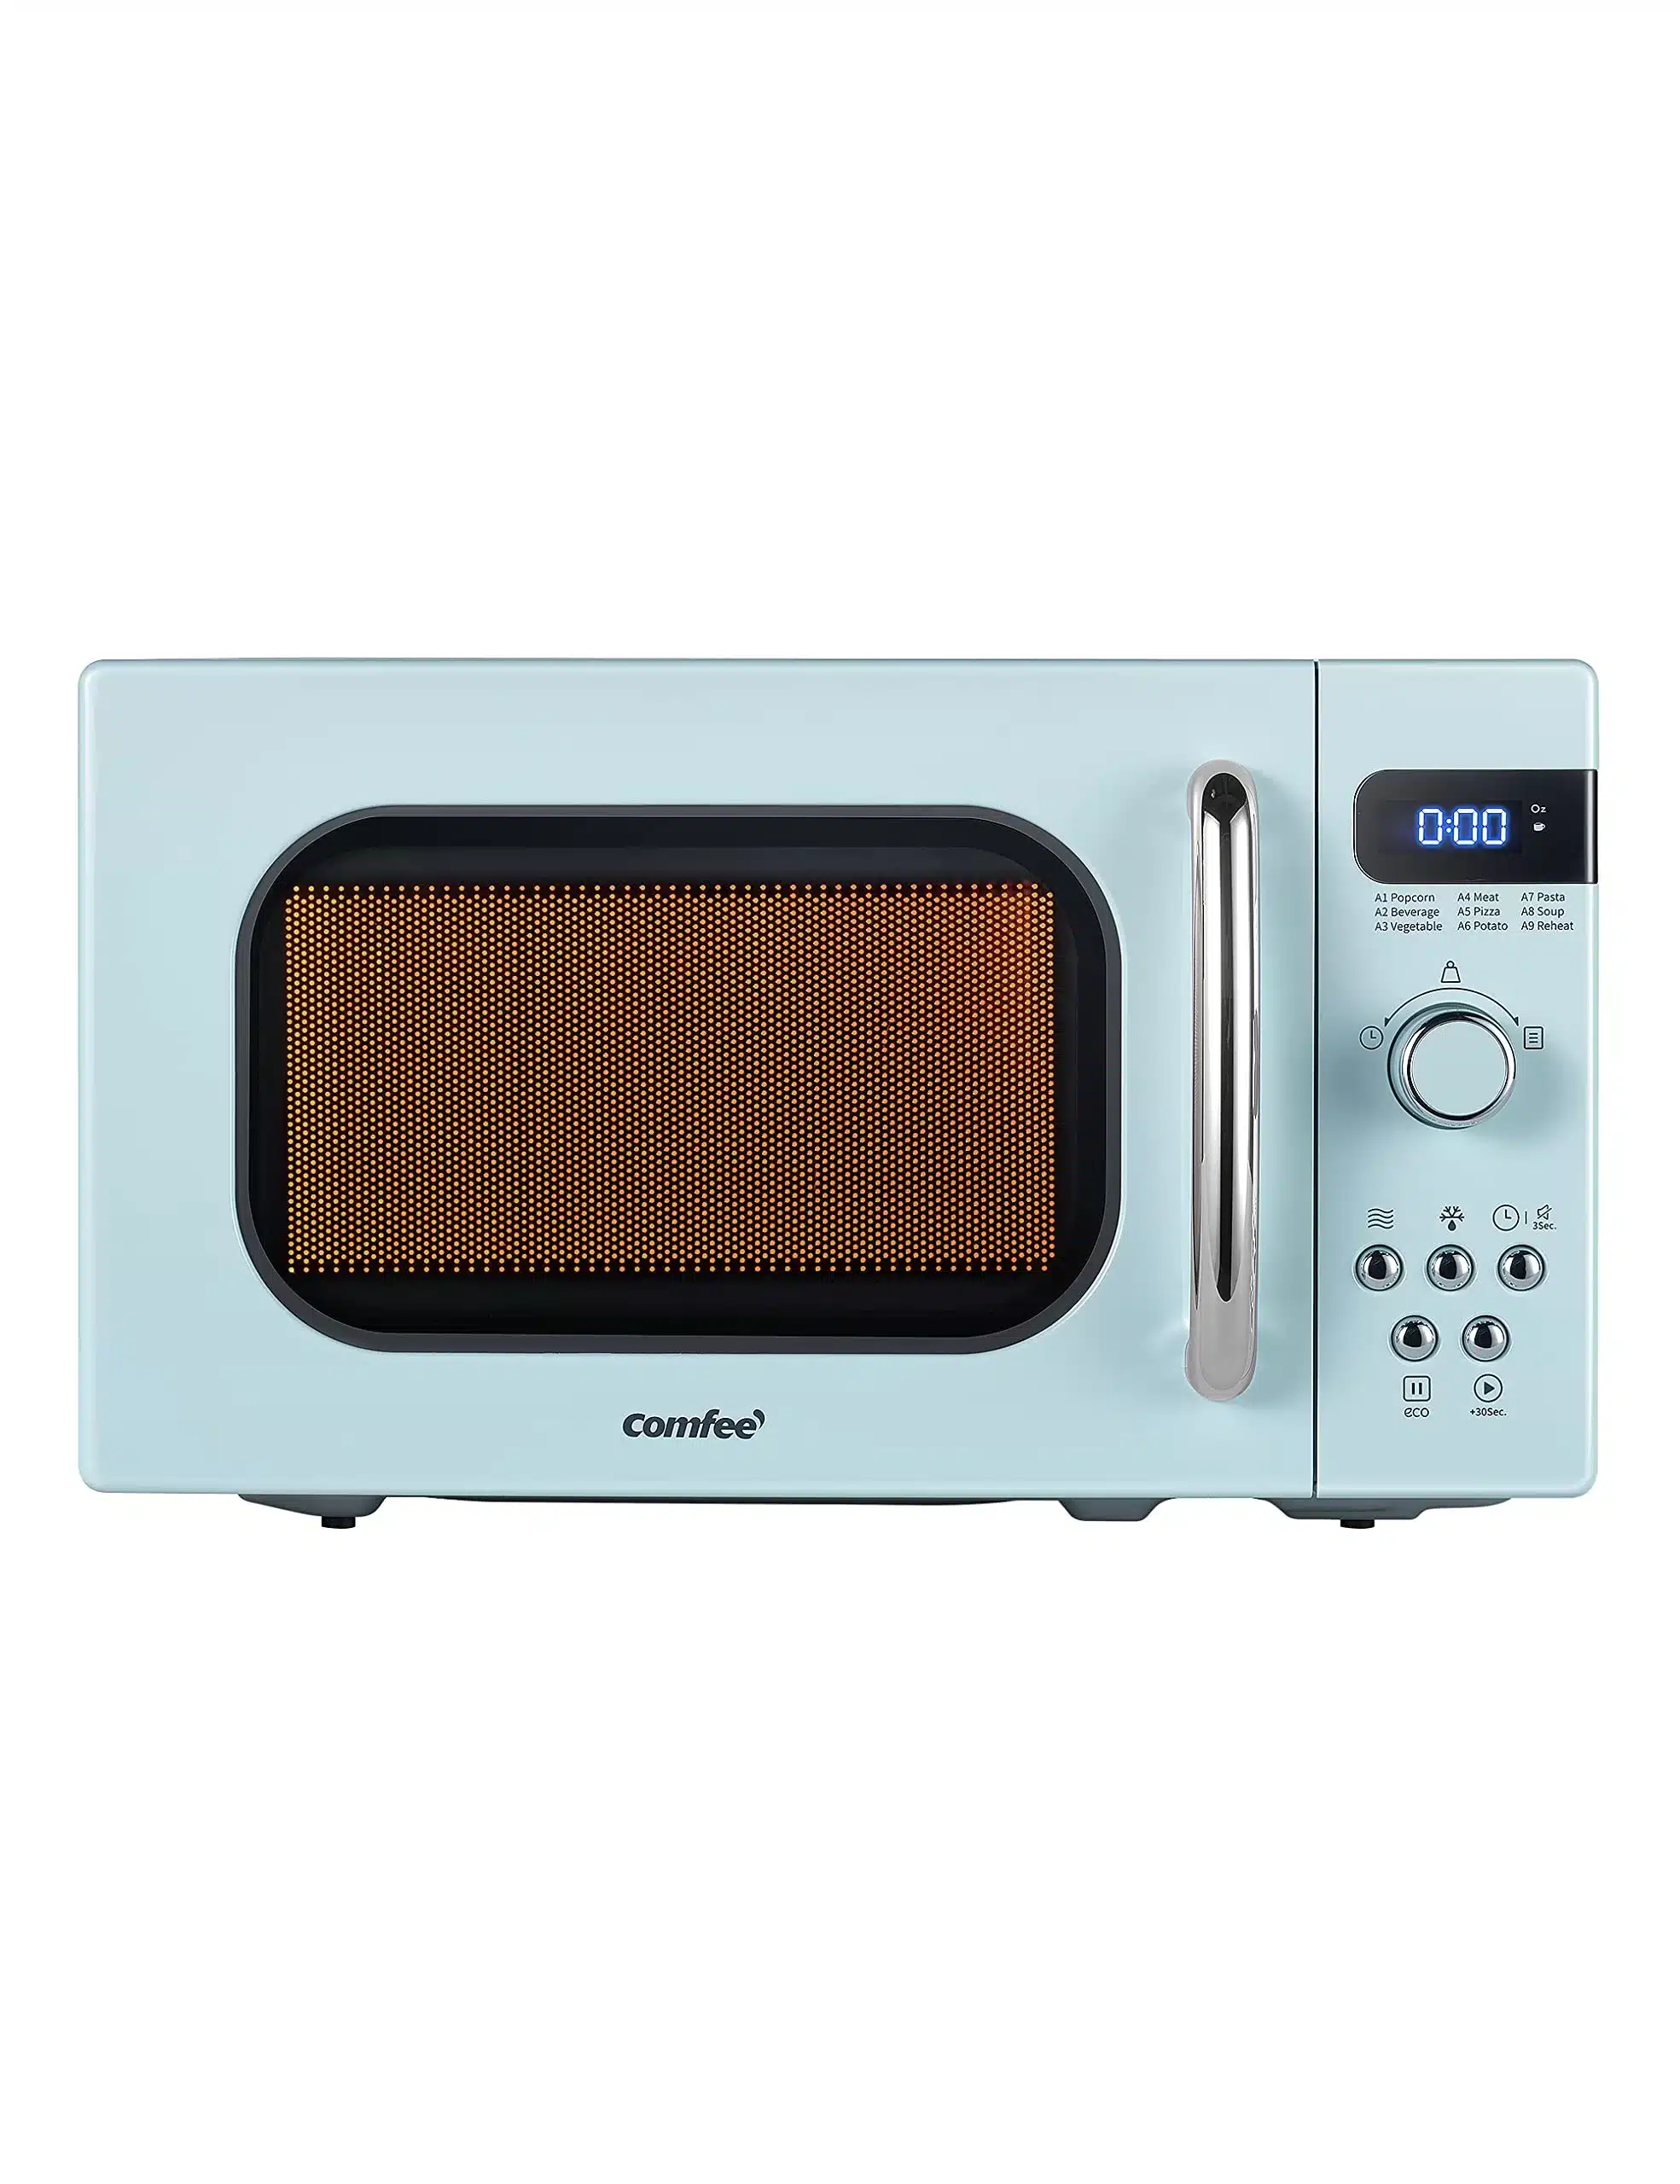 Best Compact Microwaves For Small Spaces - Forbes Vetted